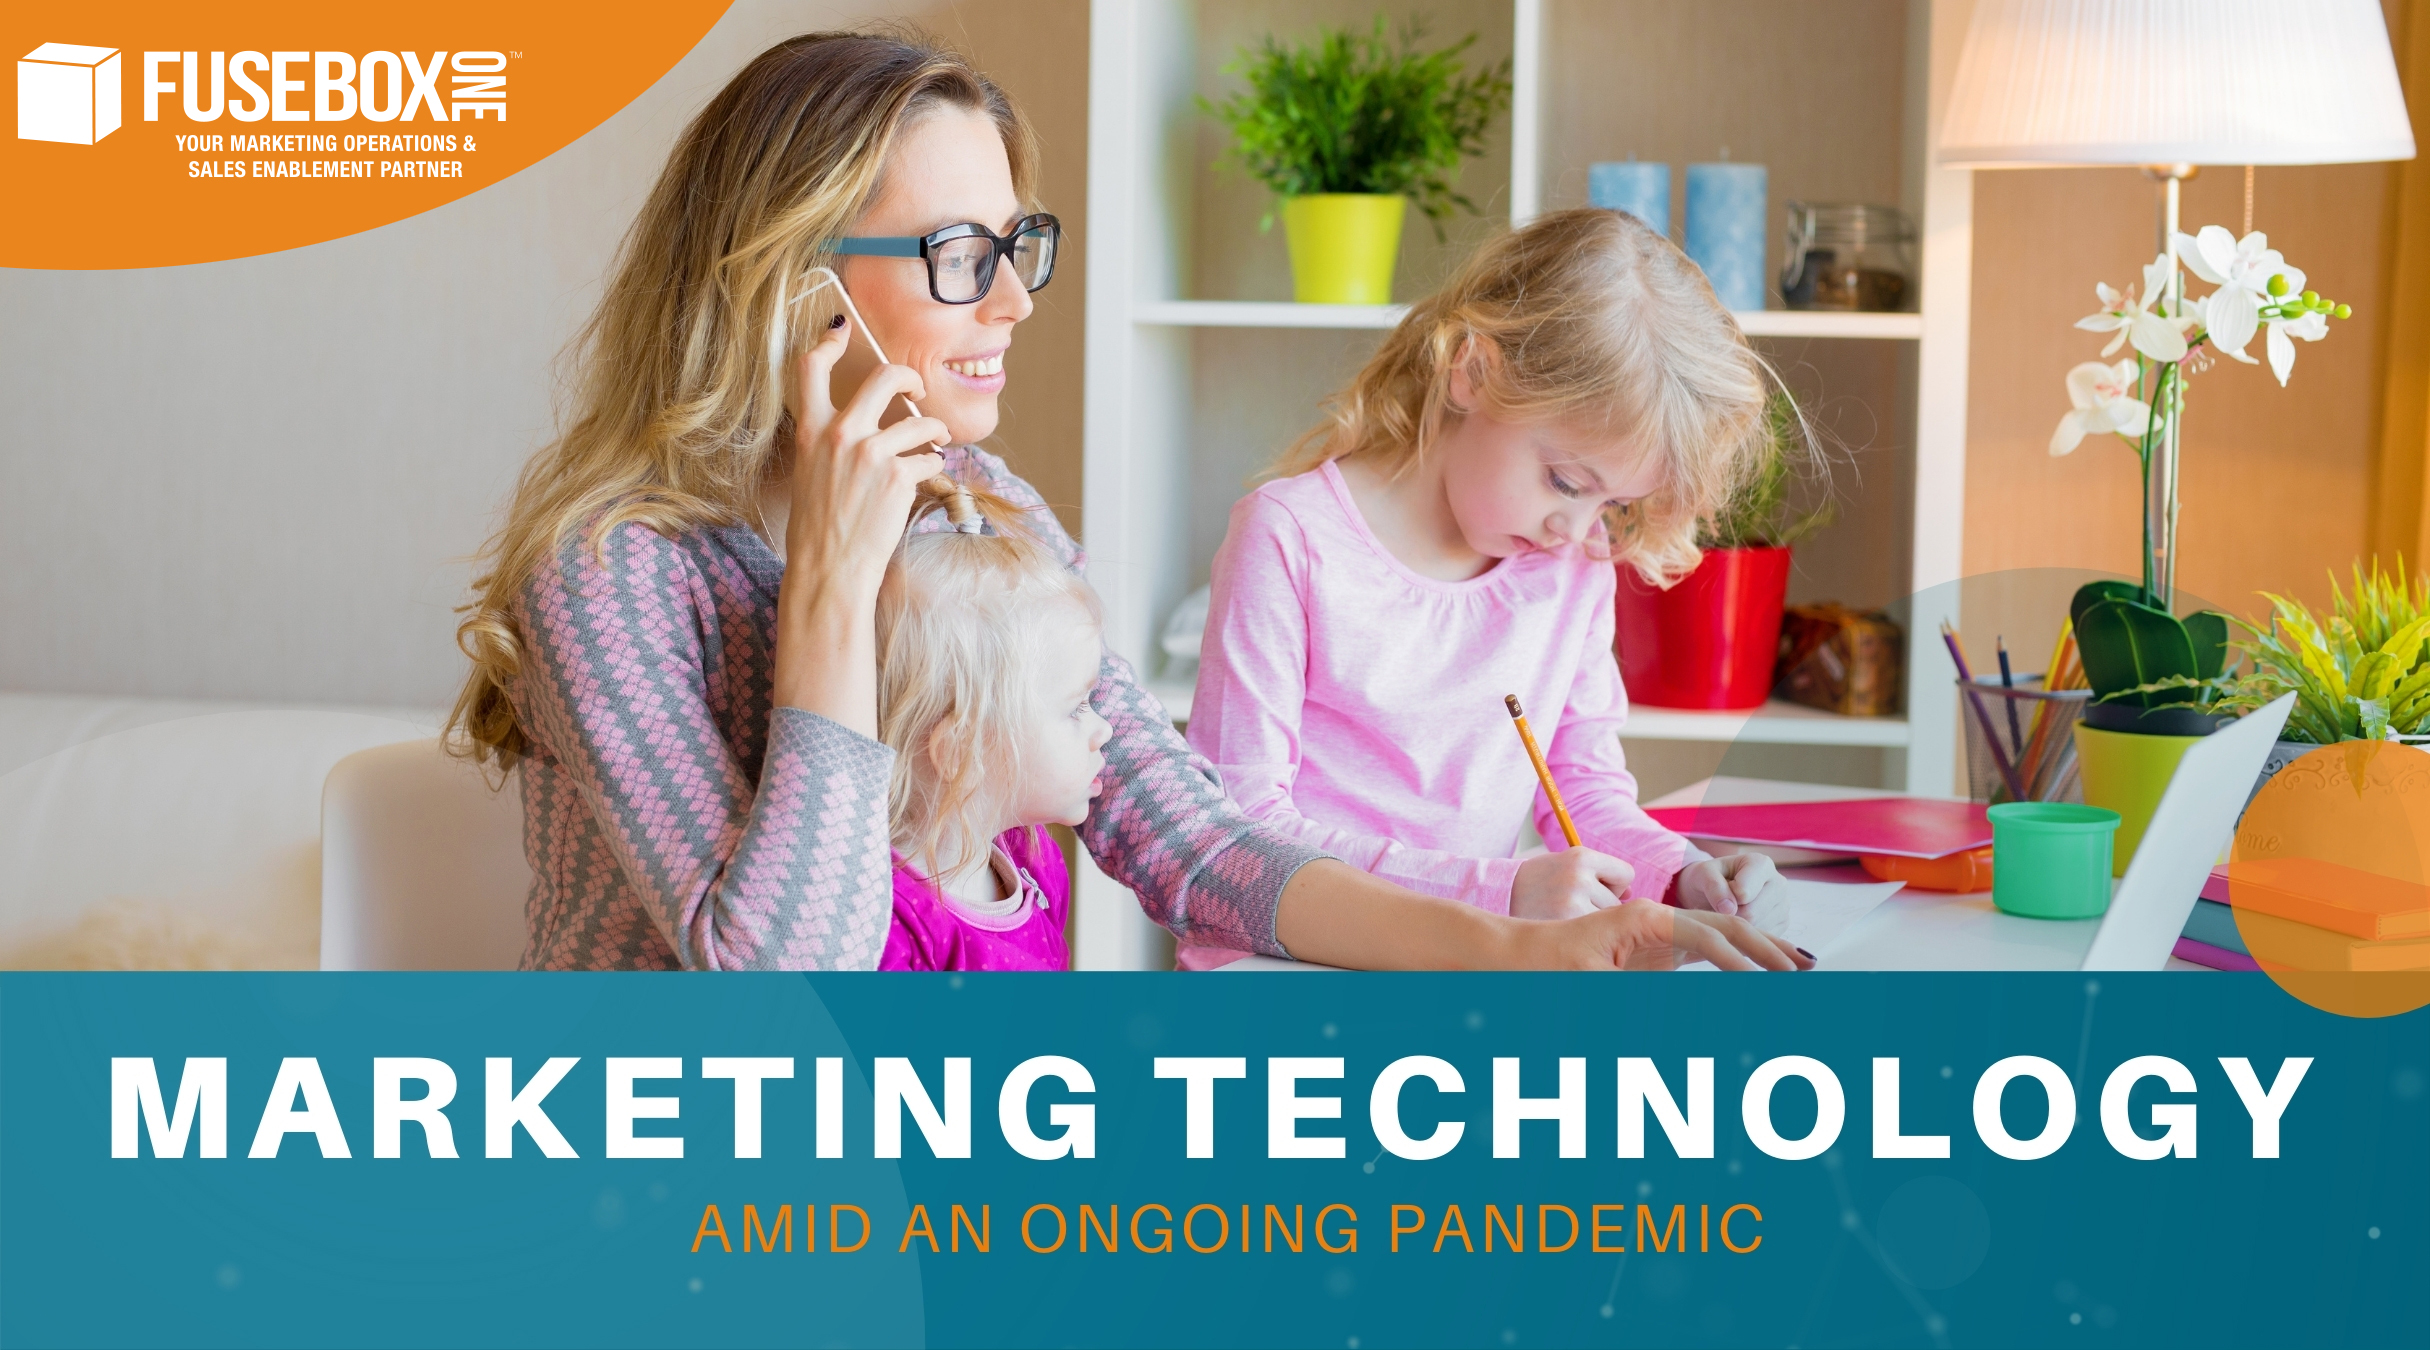 Lady and her kids using marketing technology (martech) during the pandemic.